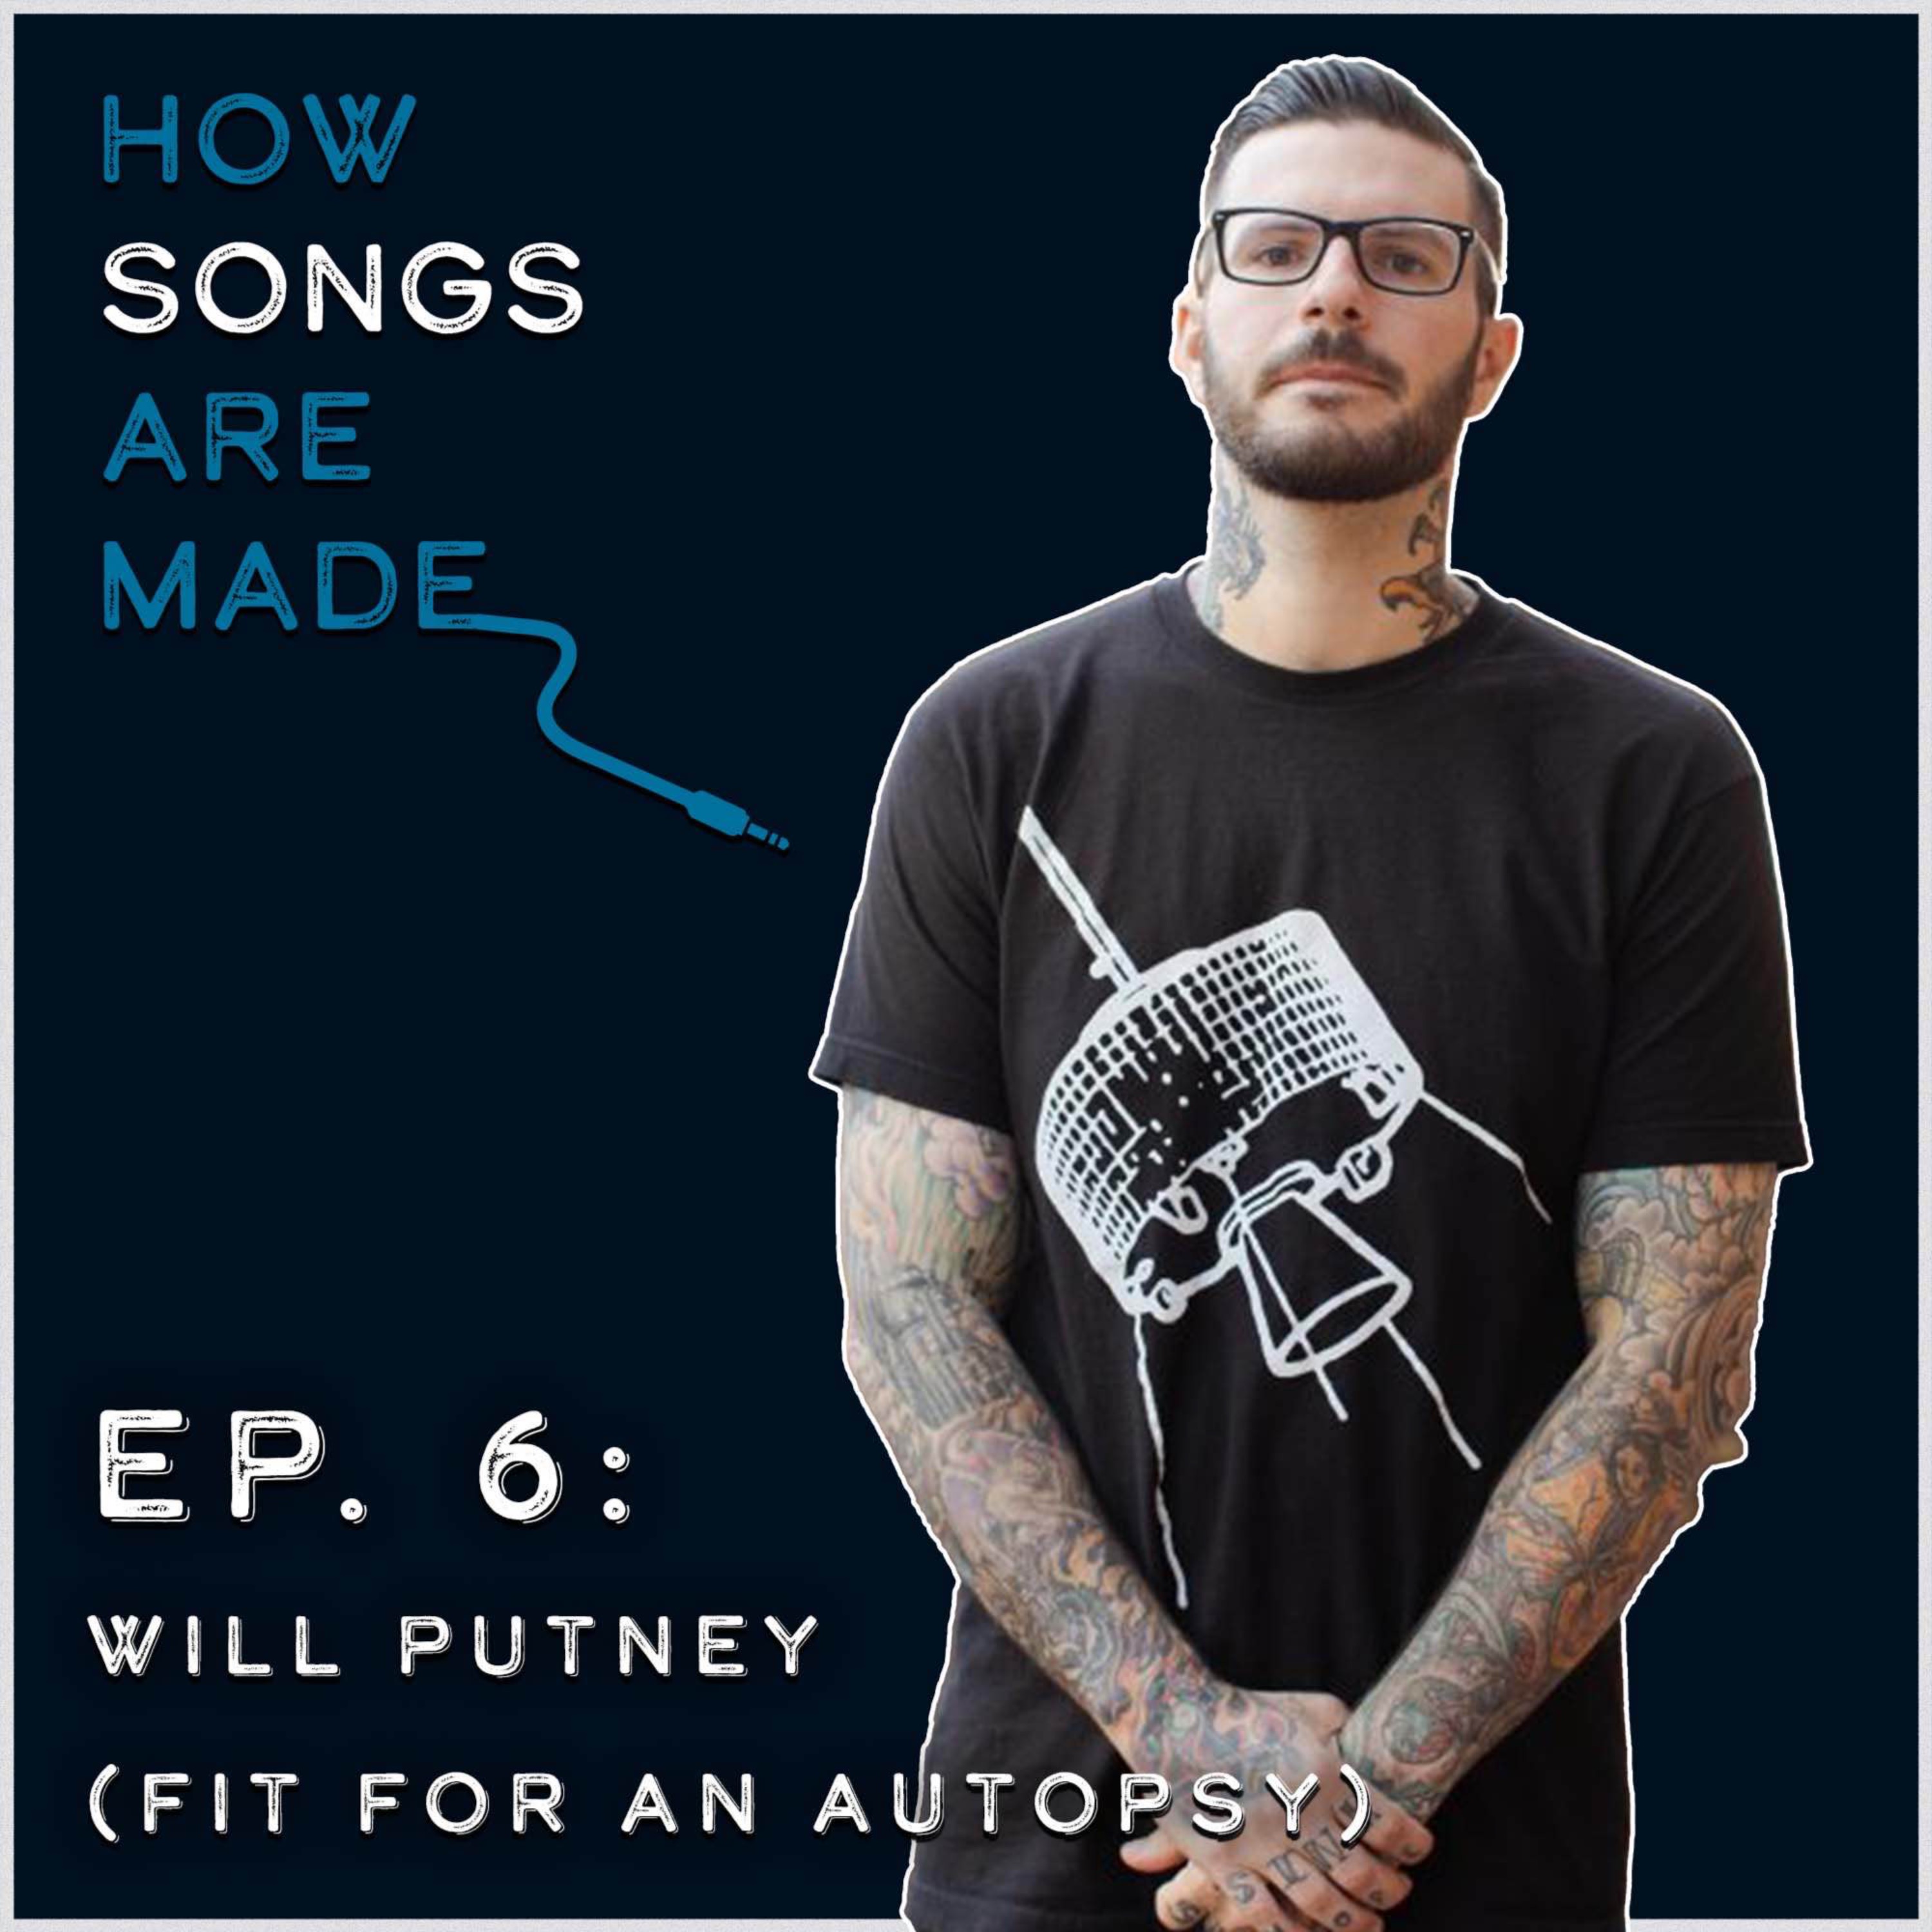 Will Putney (Fit For An Autopsy) - How We Wrote "Oh What the Future Holds" Image